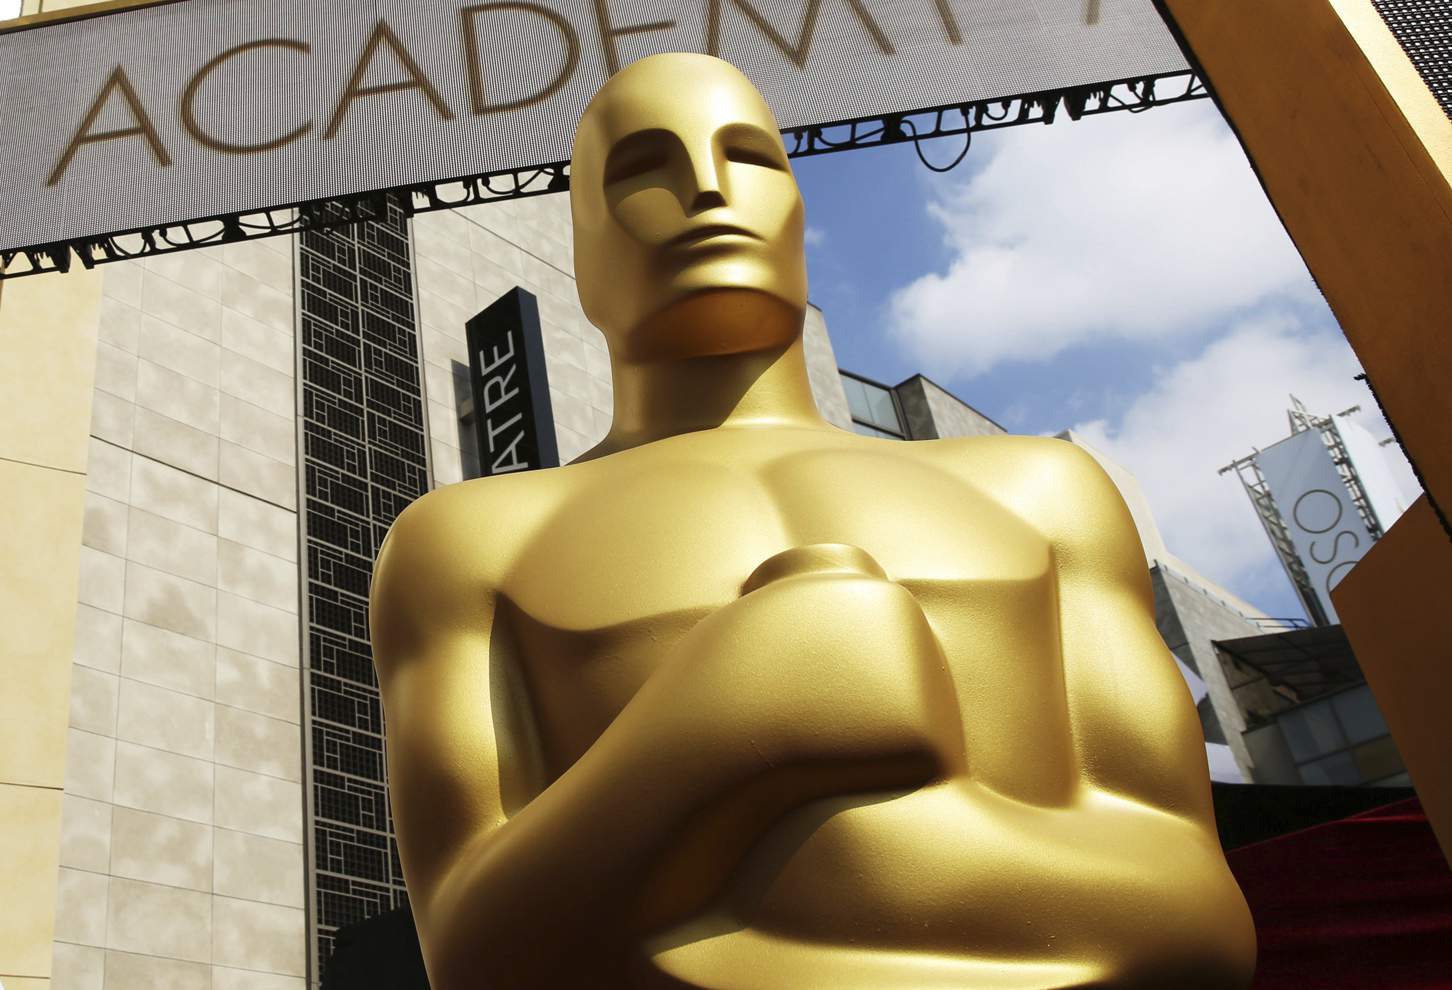 Oscars diversity criteria 'not about exclusion' say leaders